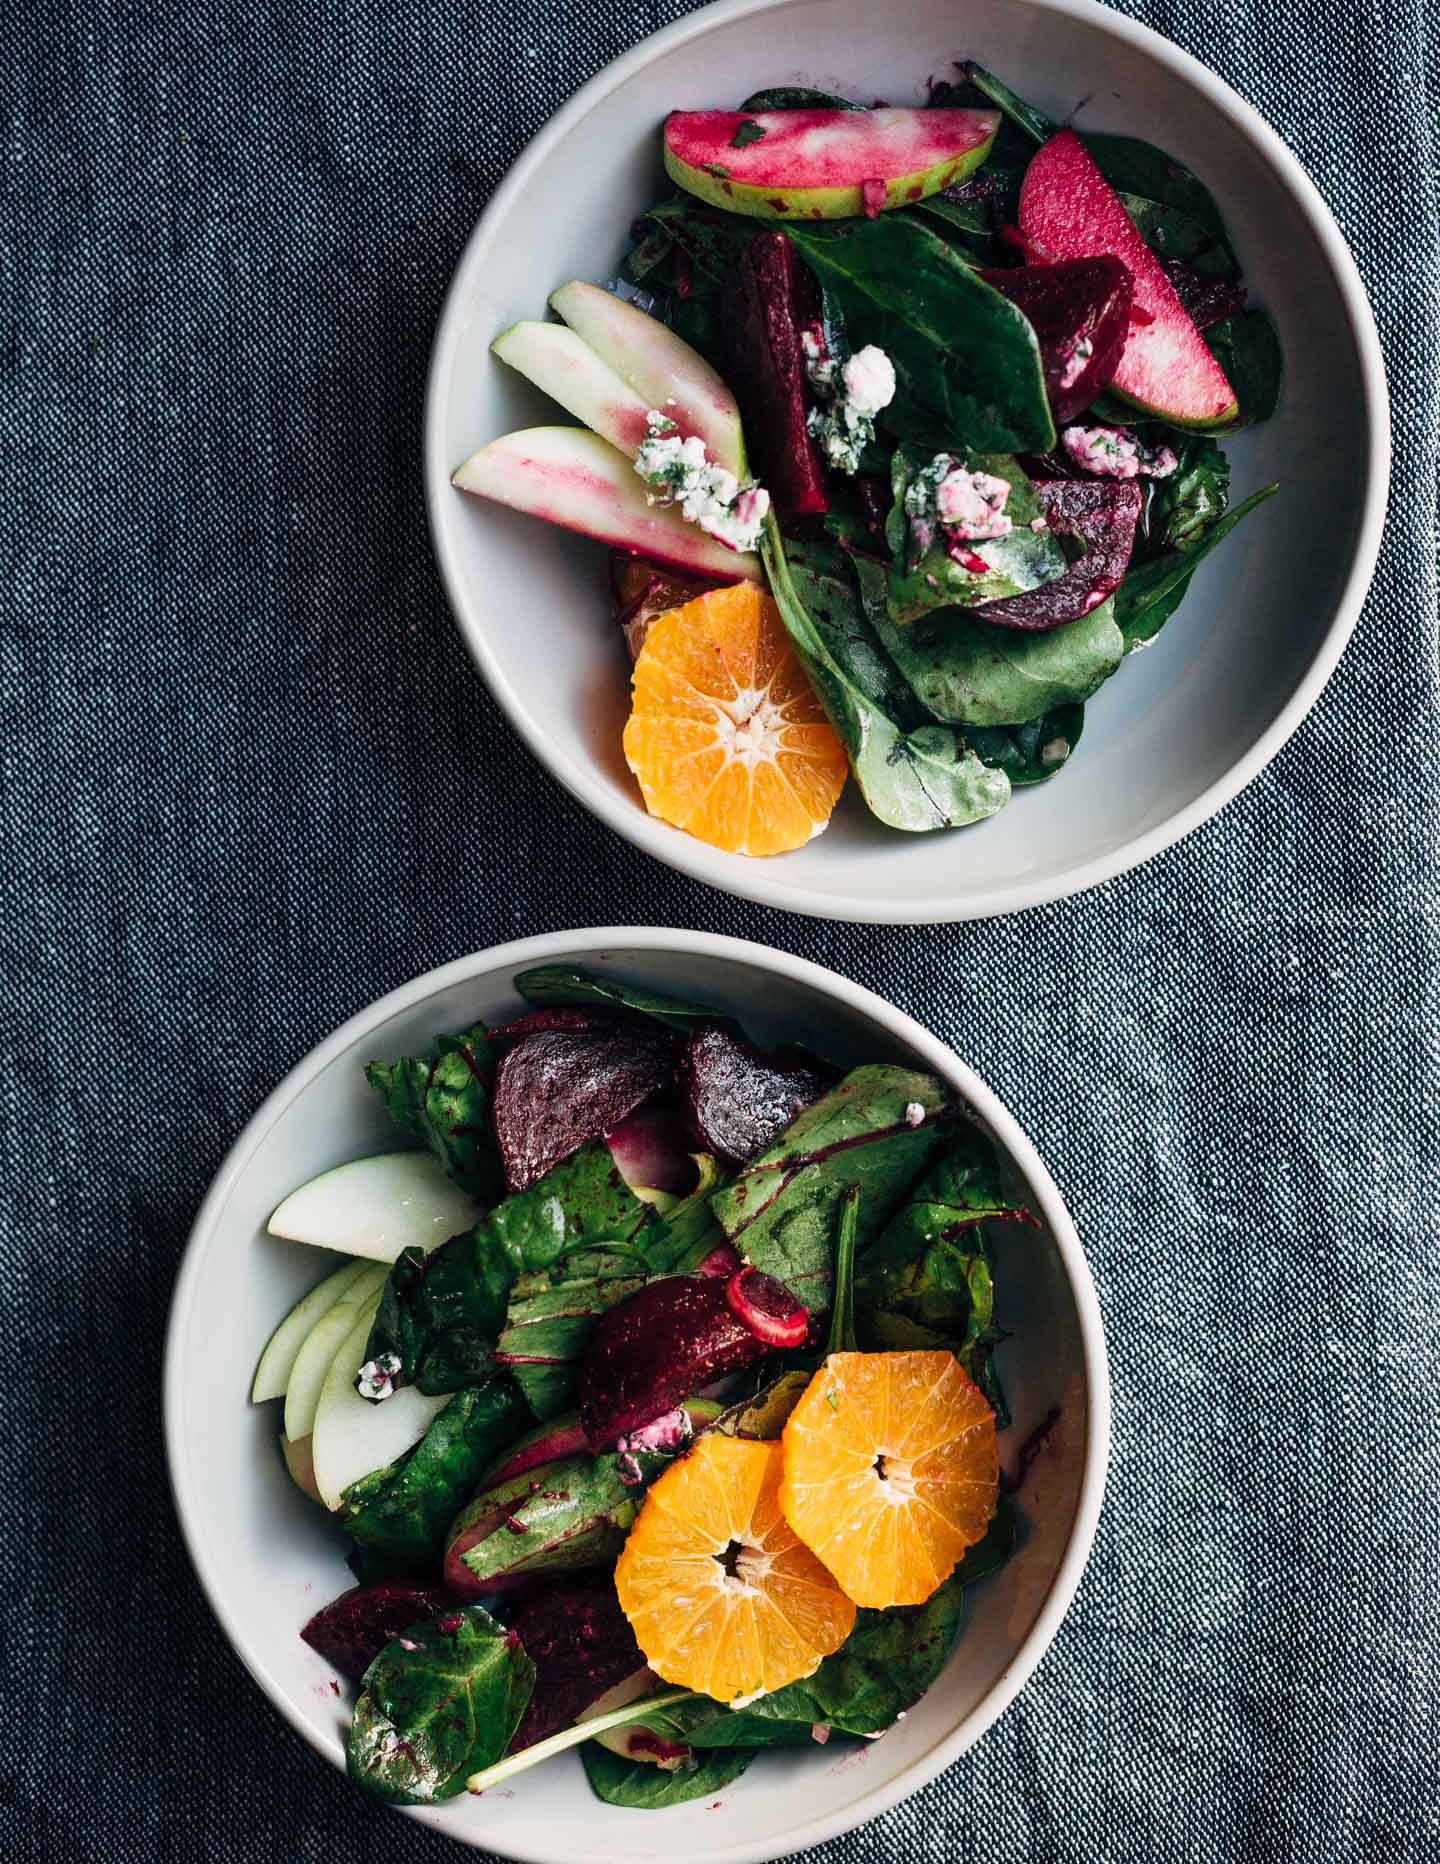 A bright and crunchy green apple and beet salad recipe featuring sliced green apples, marinated beets tossed with red wine vinegar and shallot, beet greens, spinach, herbed goat cheese crumbles, and a simple vinaigrette. 